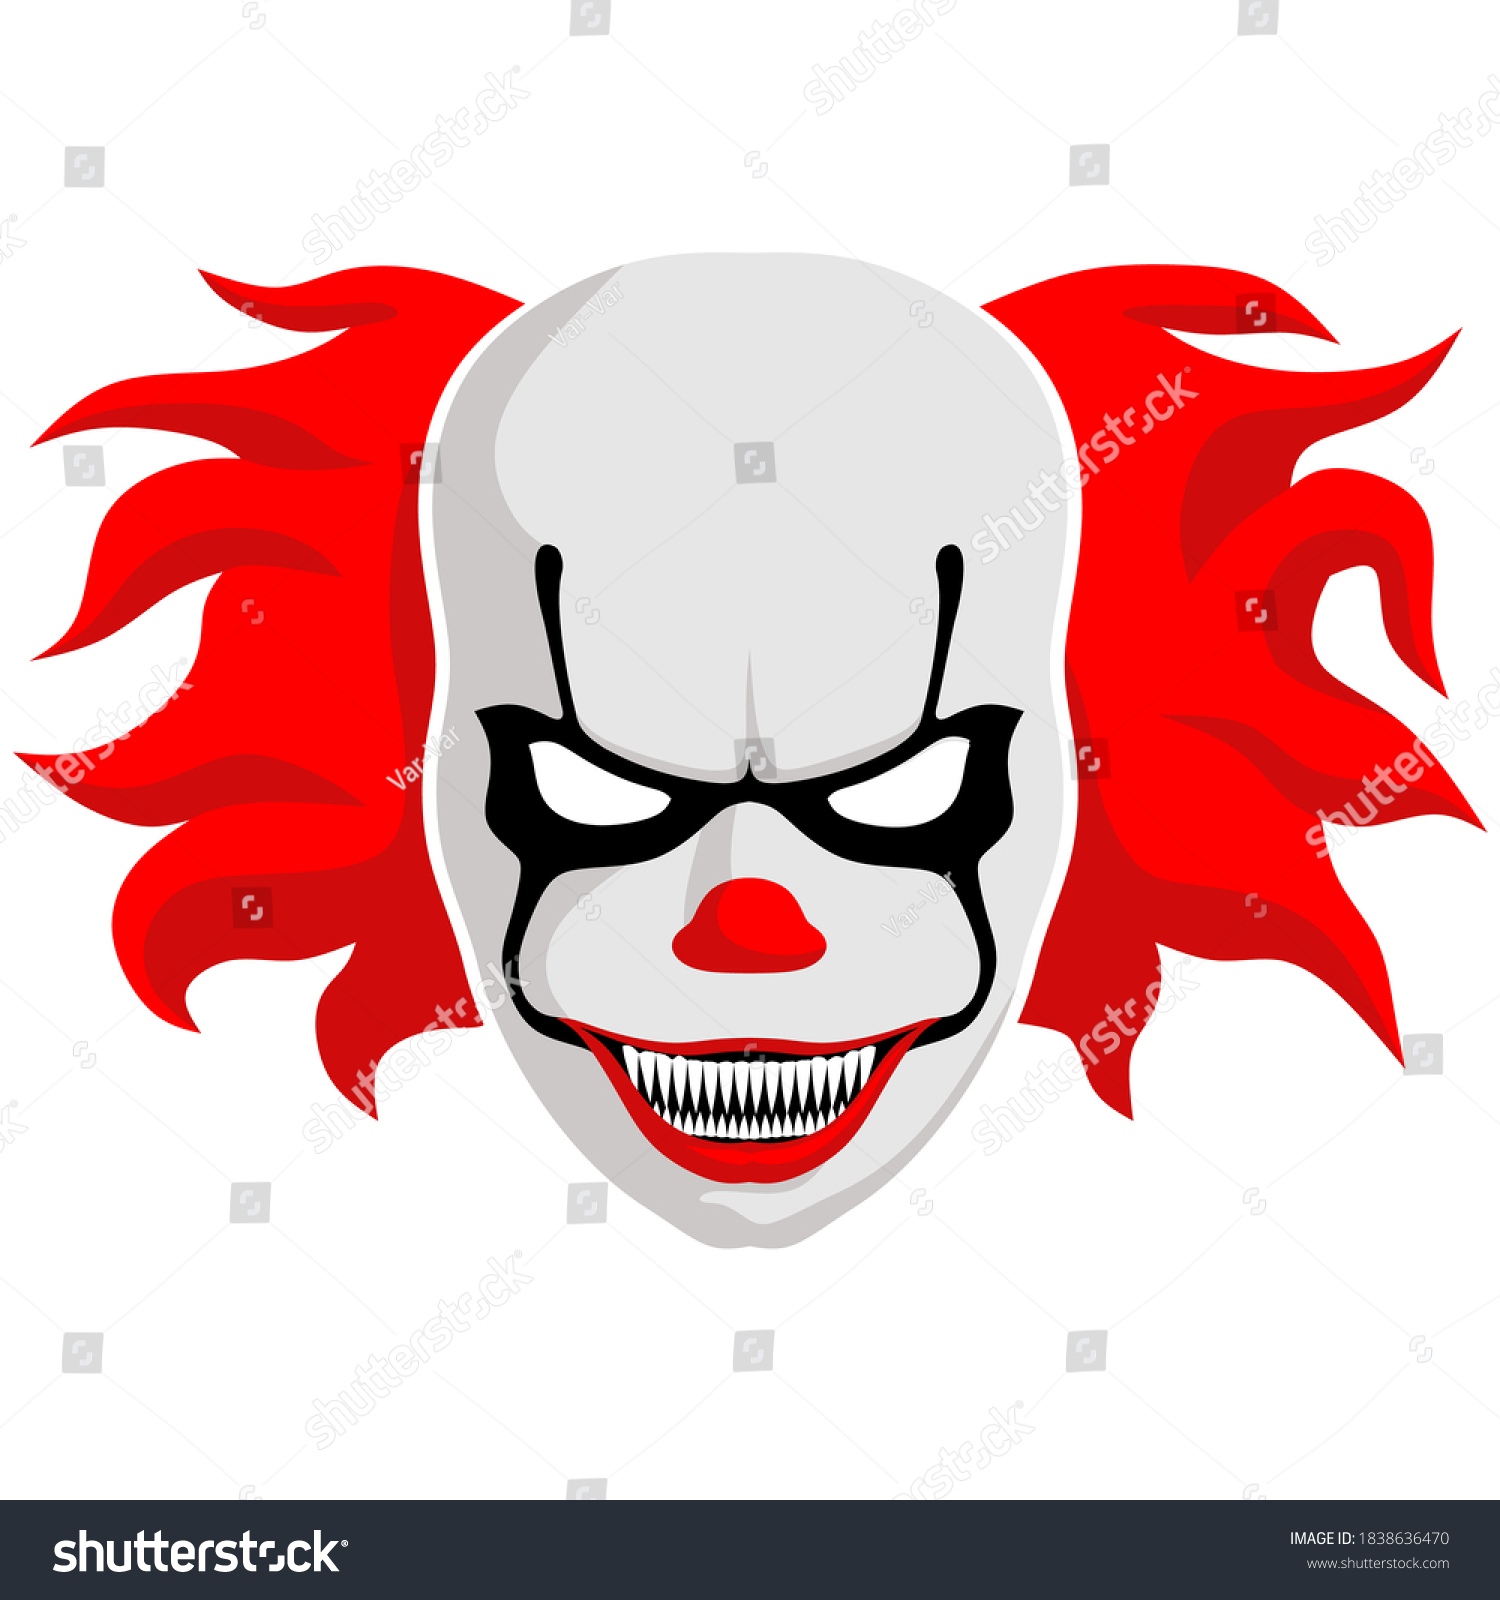 2,031 Scary clown drawing Images, Stock Photos & Vectors | Shutterstock